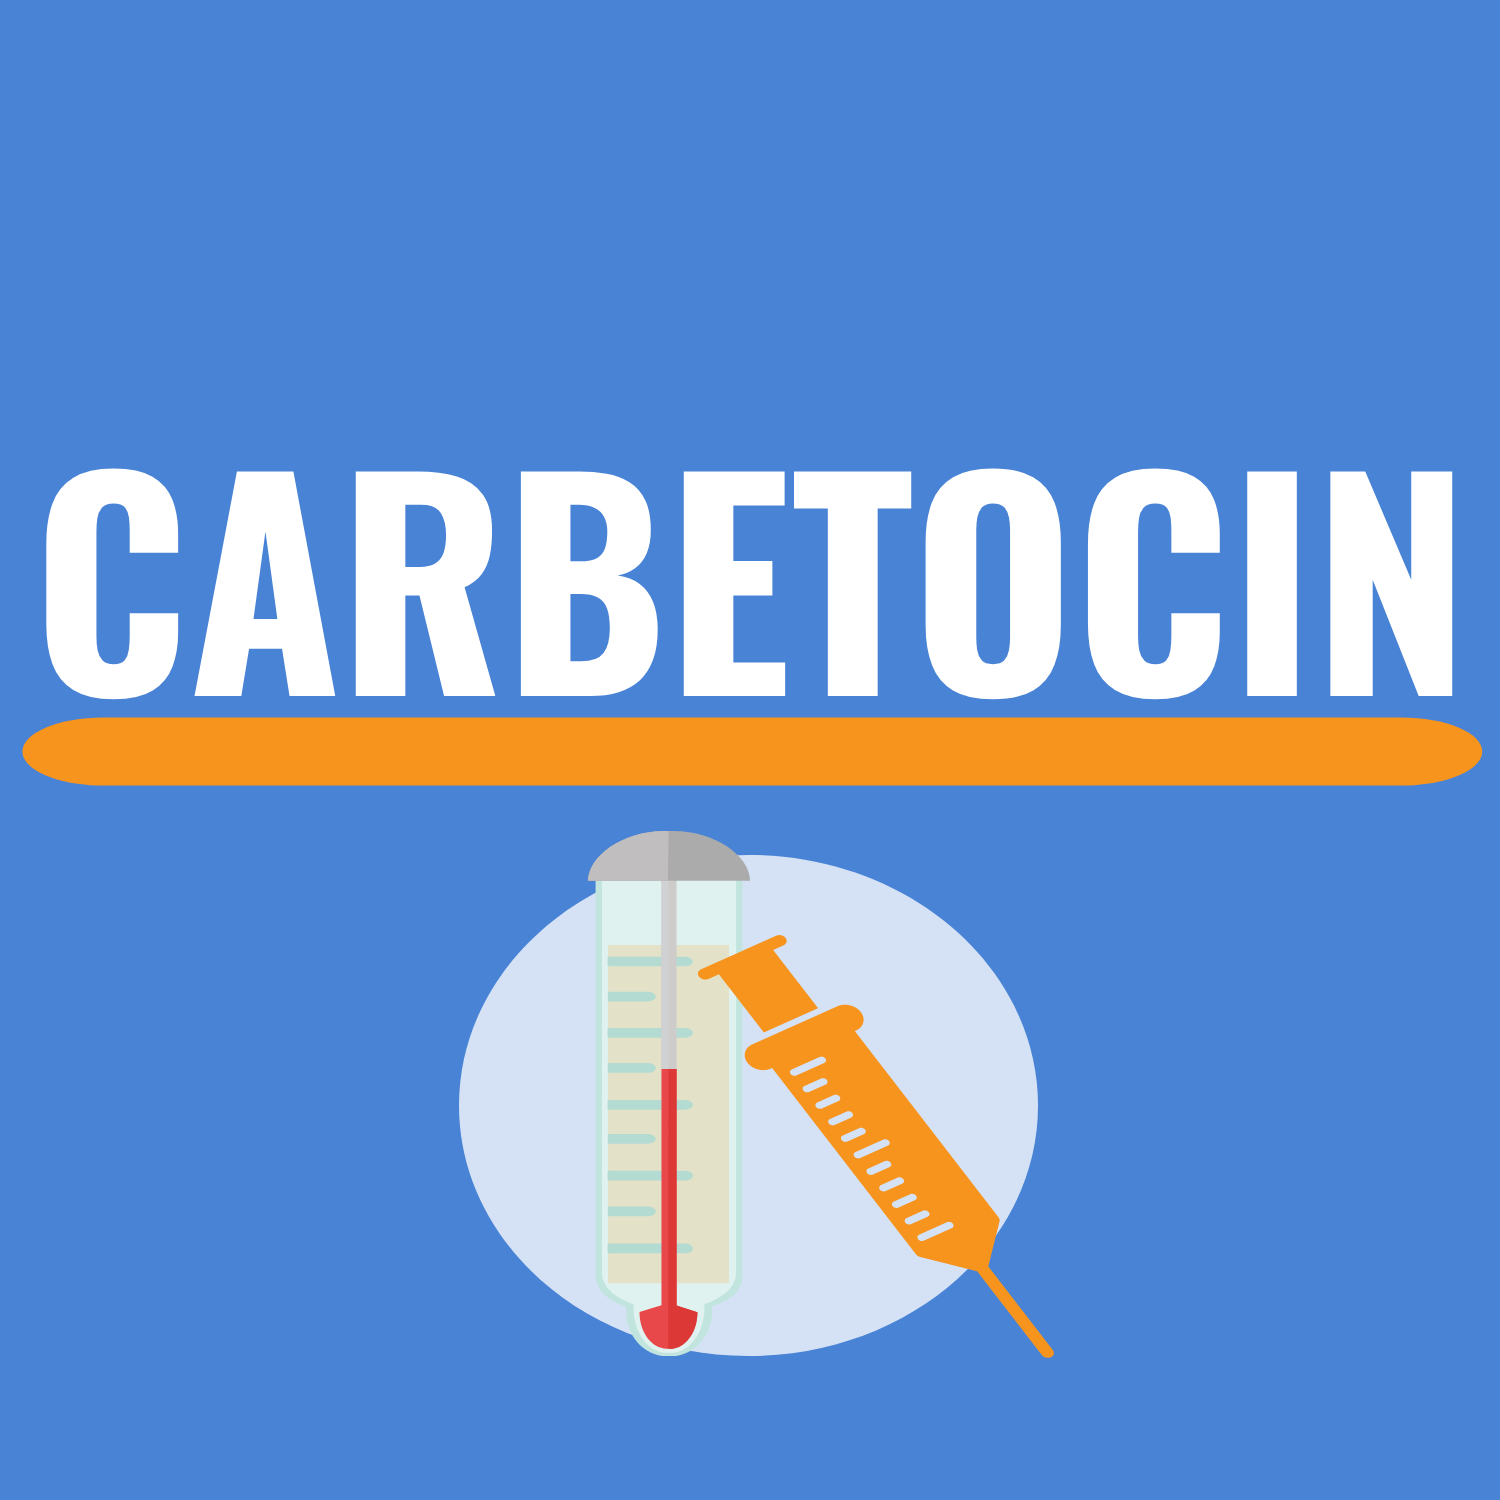 Carbetocin: To prevent life-threatening pregnancy complications